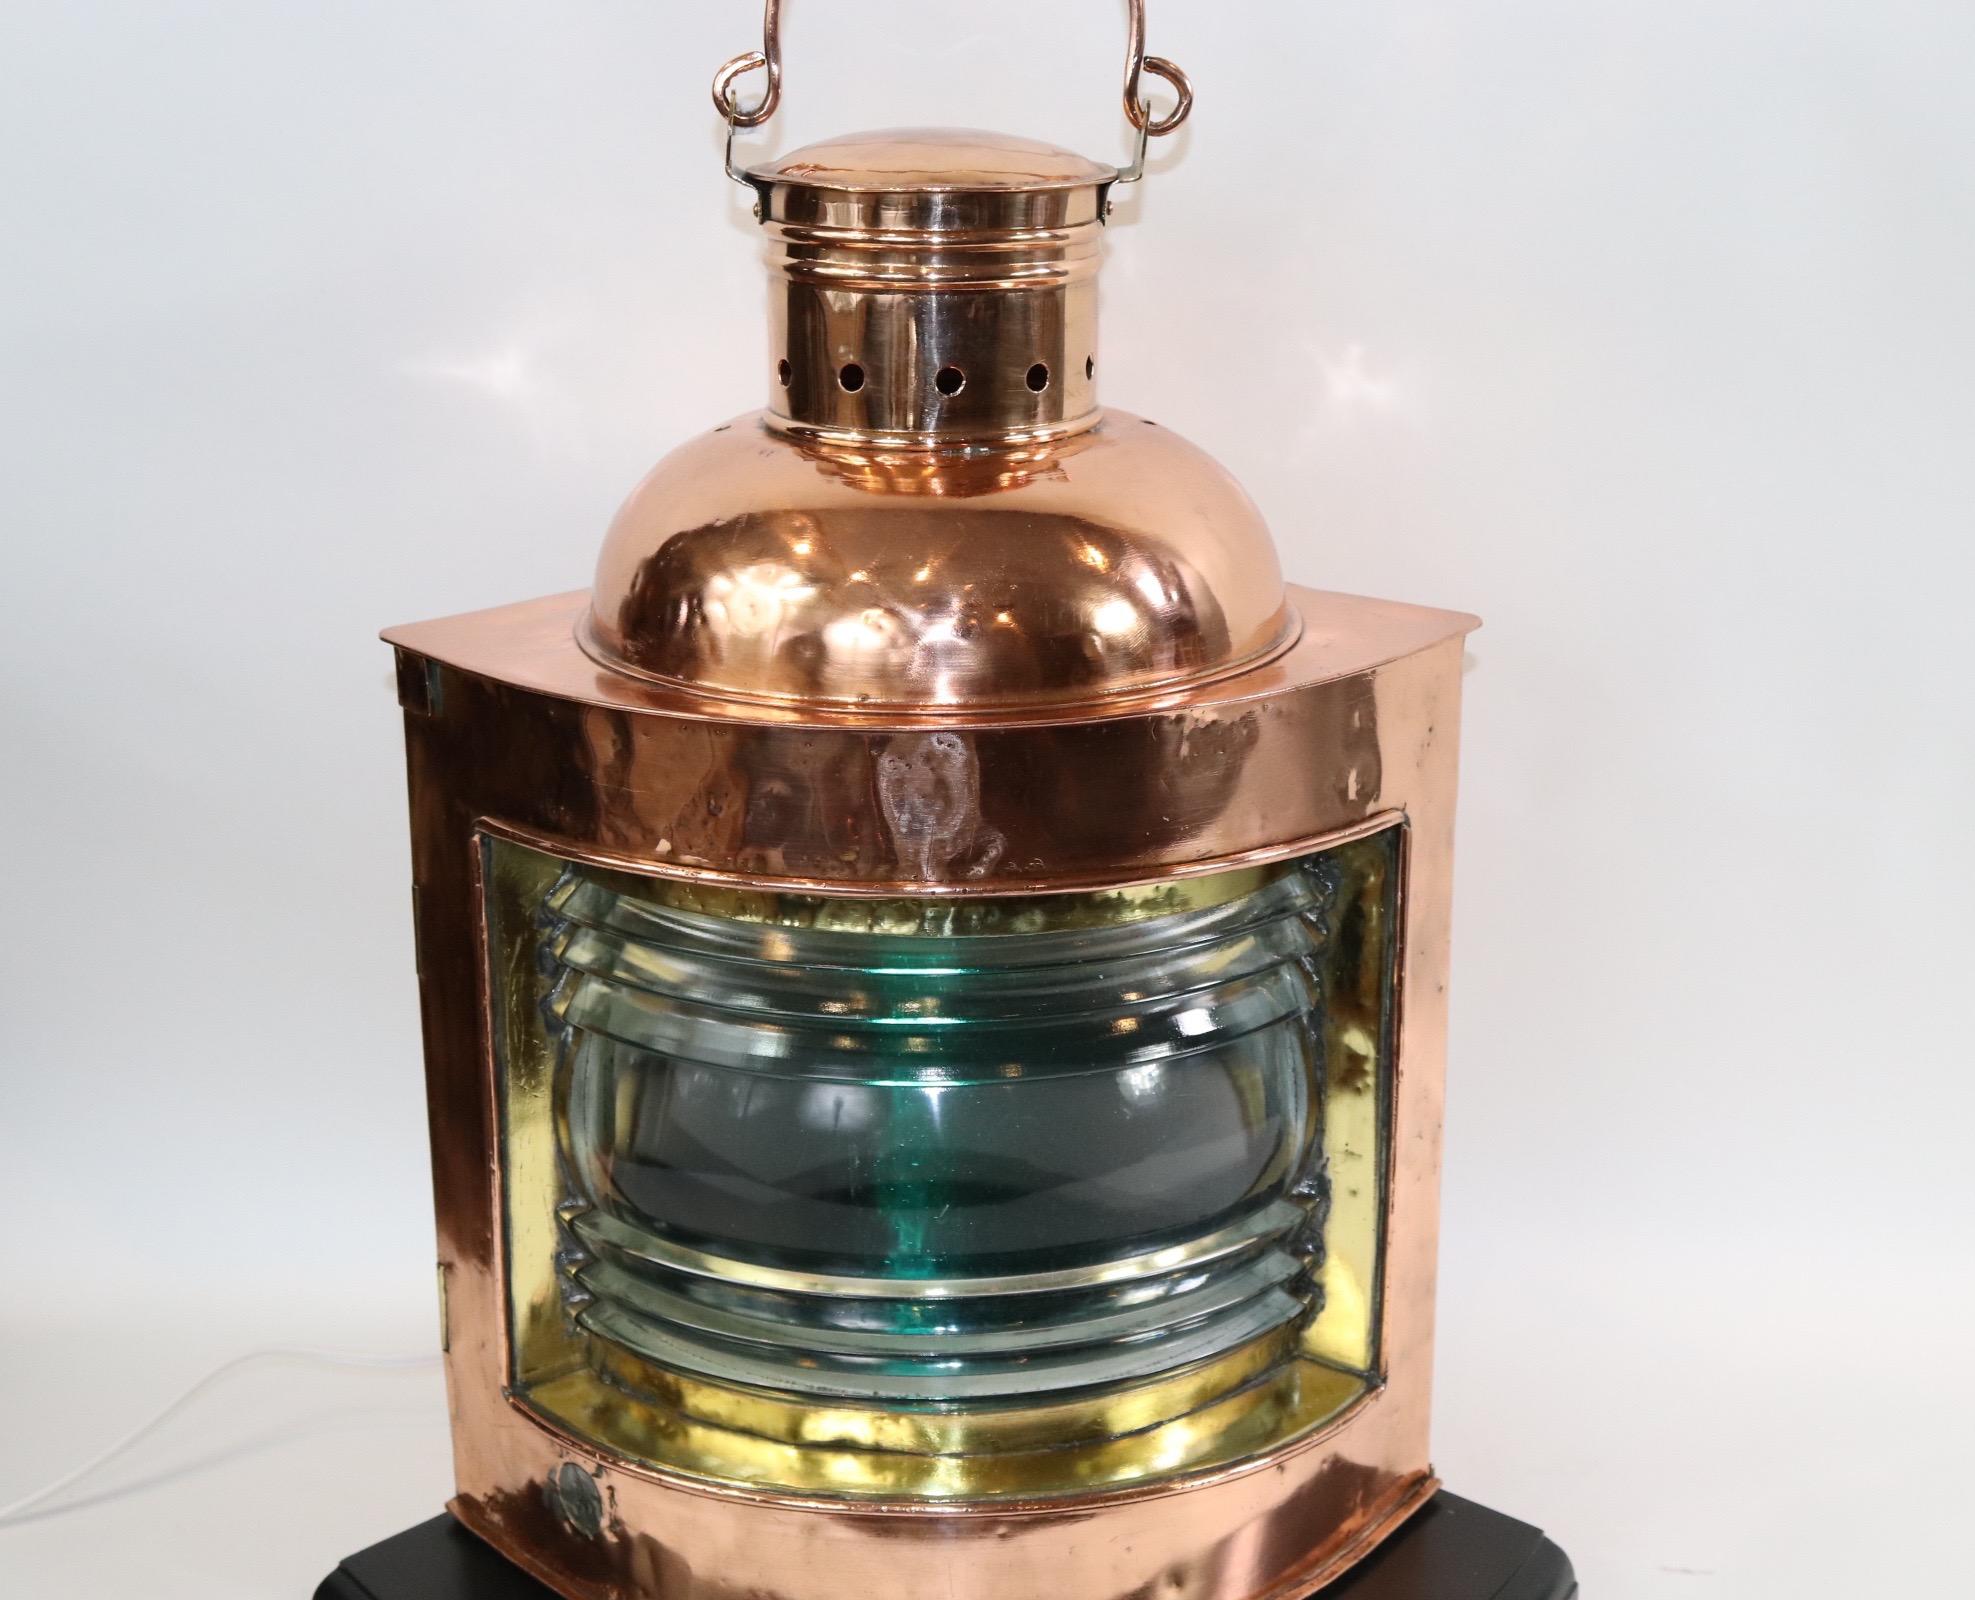 Highly polished and lacquered solid copper ships lantern with clear Fresnel glass lens and removable green filter. The copper bodied lantern has brass bezel, hinges and handle. Mounted to a thick wood base and wired with new socket and wired for